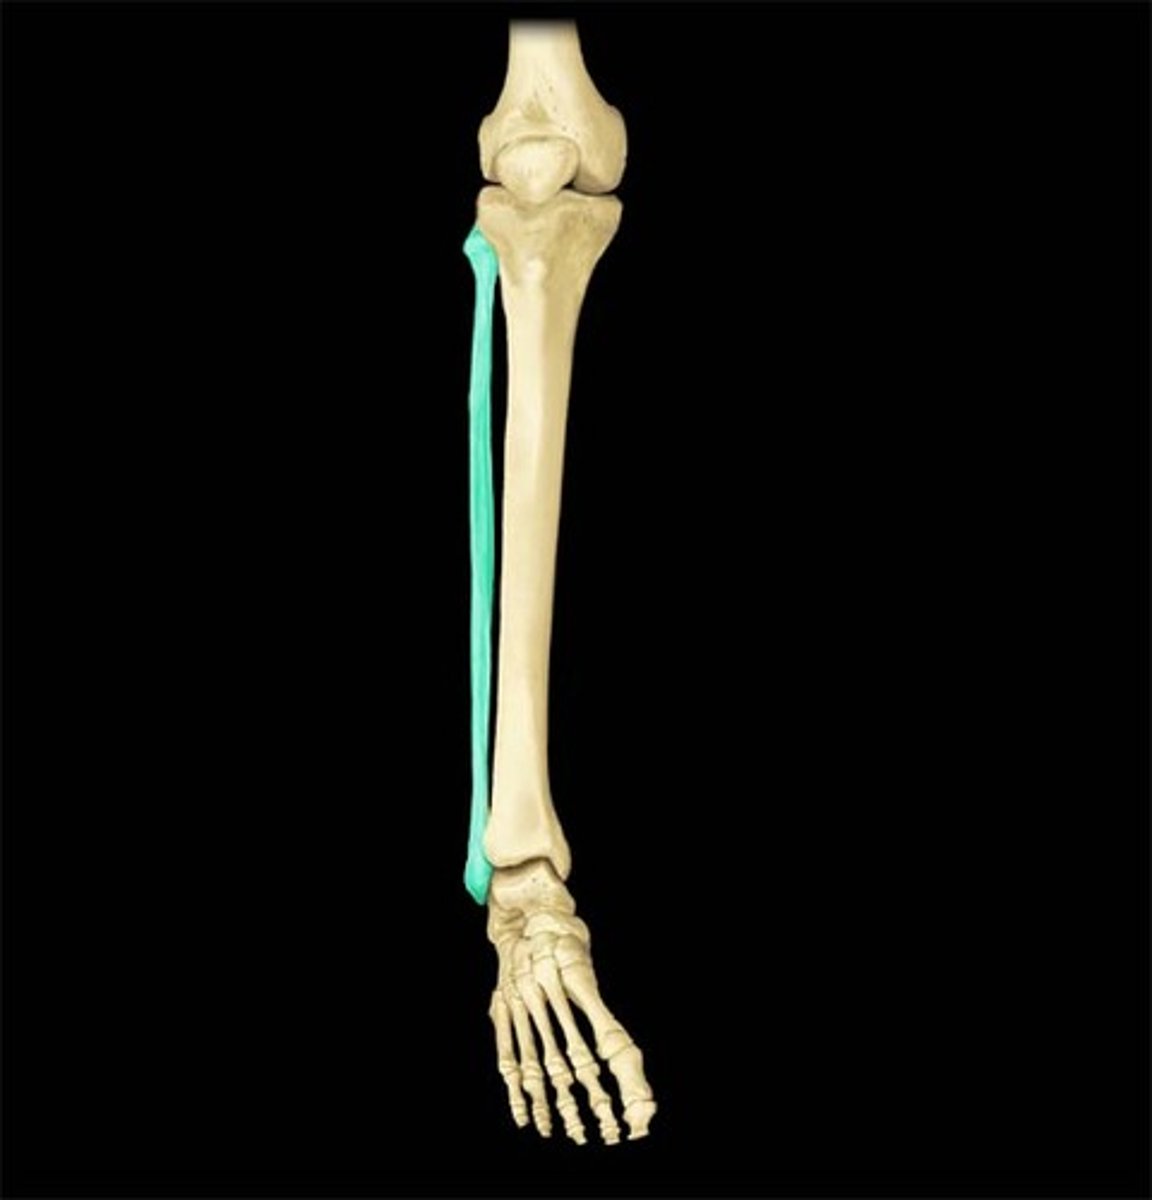 <p>- smaller, lateral, deep, stabilizes ankle joint</p><p>- tibiofular distal and proximal</p><p>- fibulotalar joint</p><p>- Lateral malleolus(bump on ankle)</p>